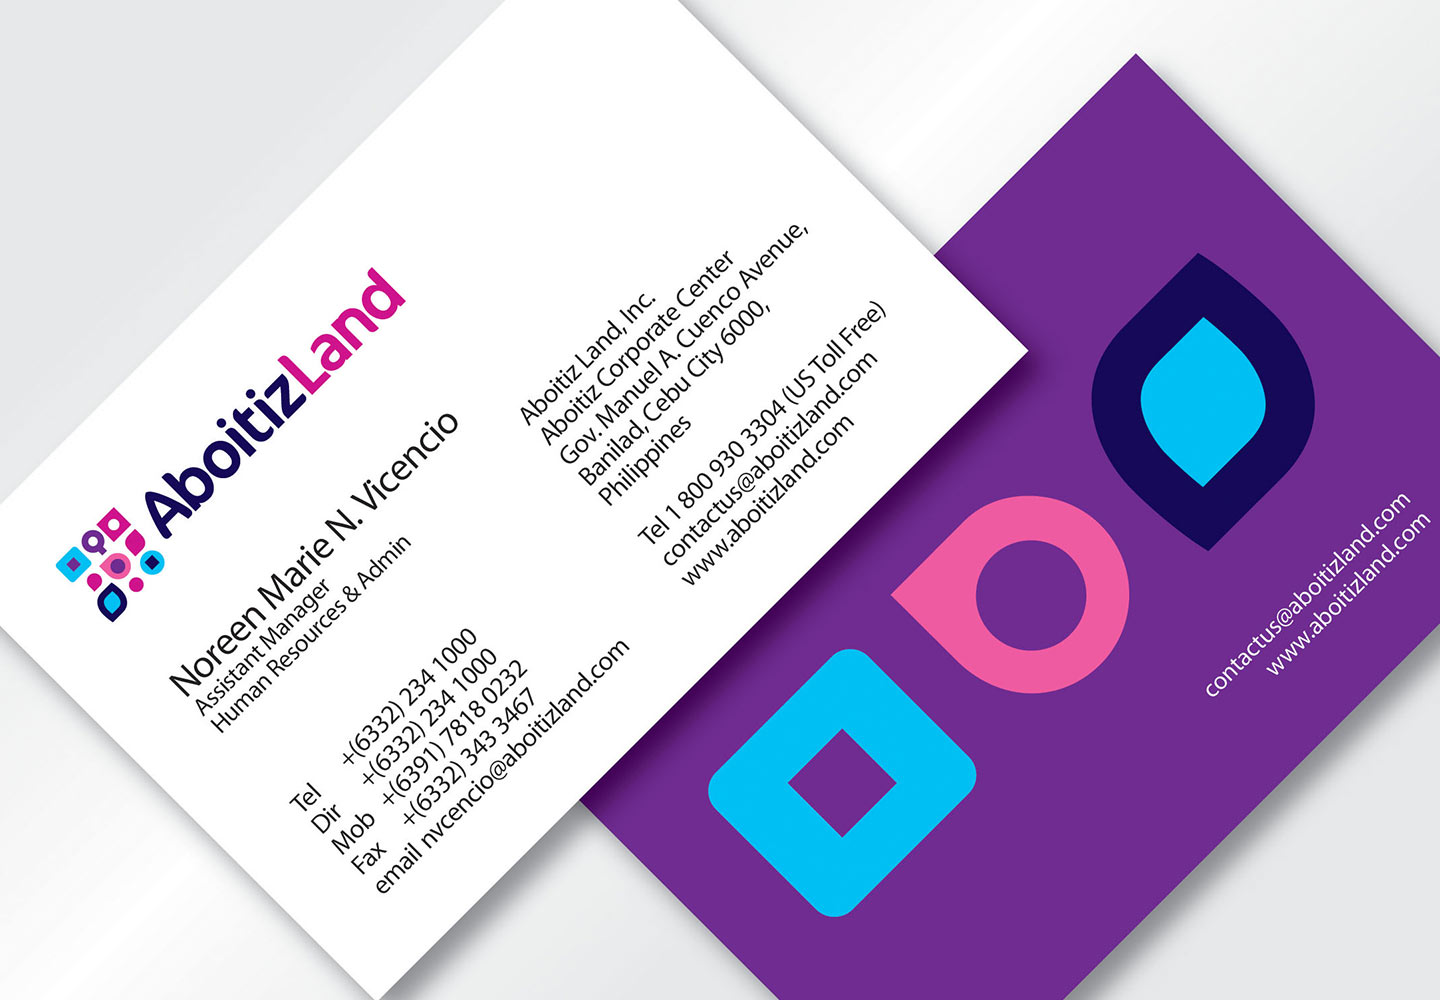 Brand consultancy in Real Estate Industry. Business Card for AboitizLand.